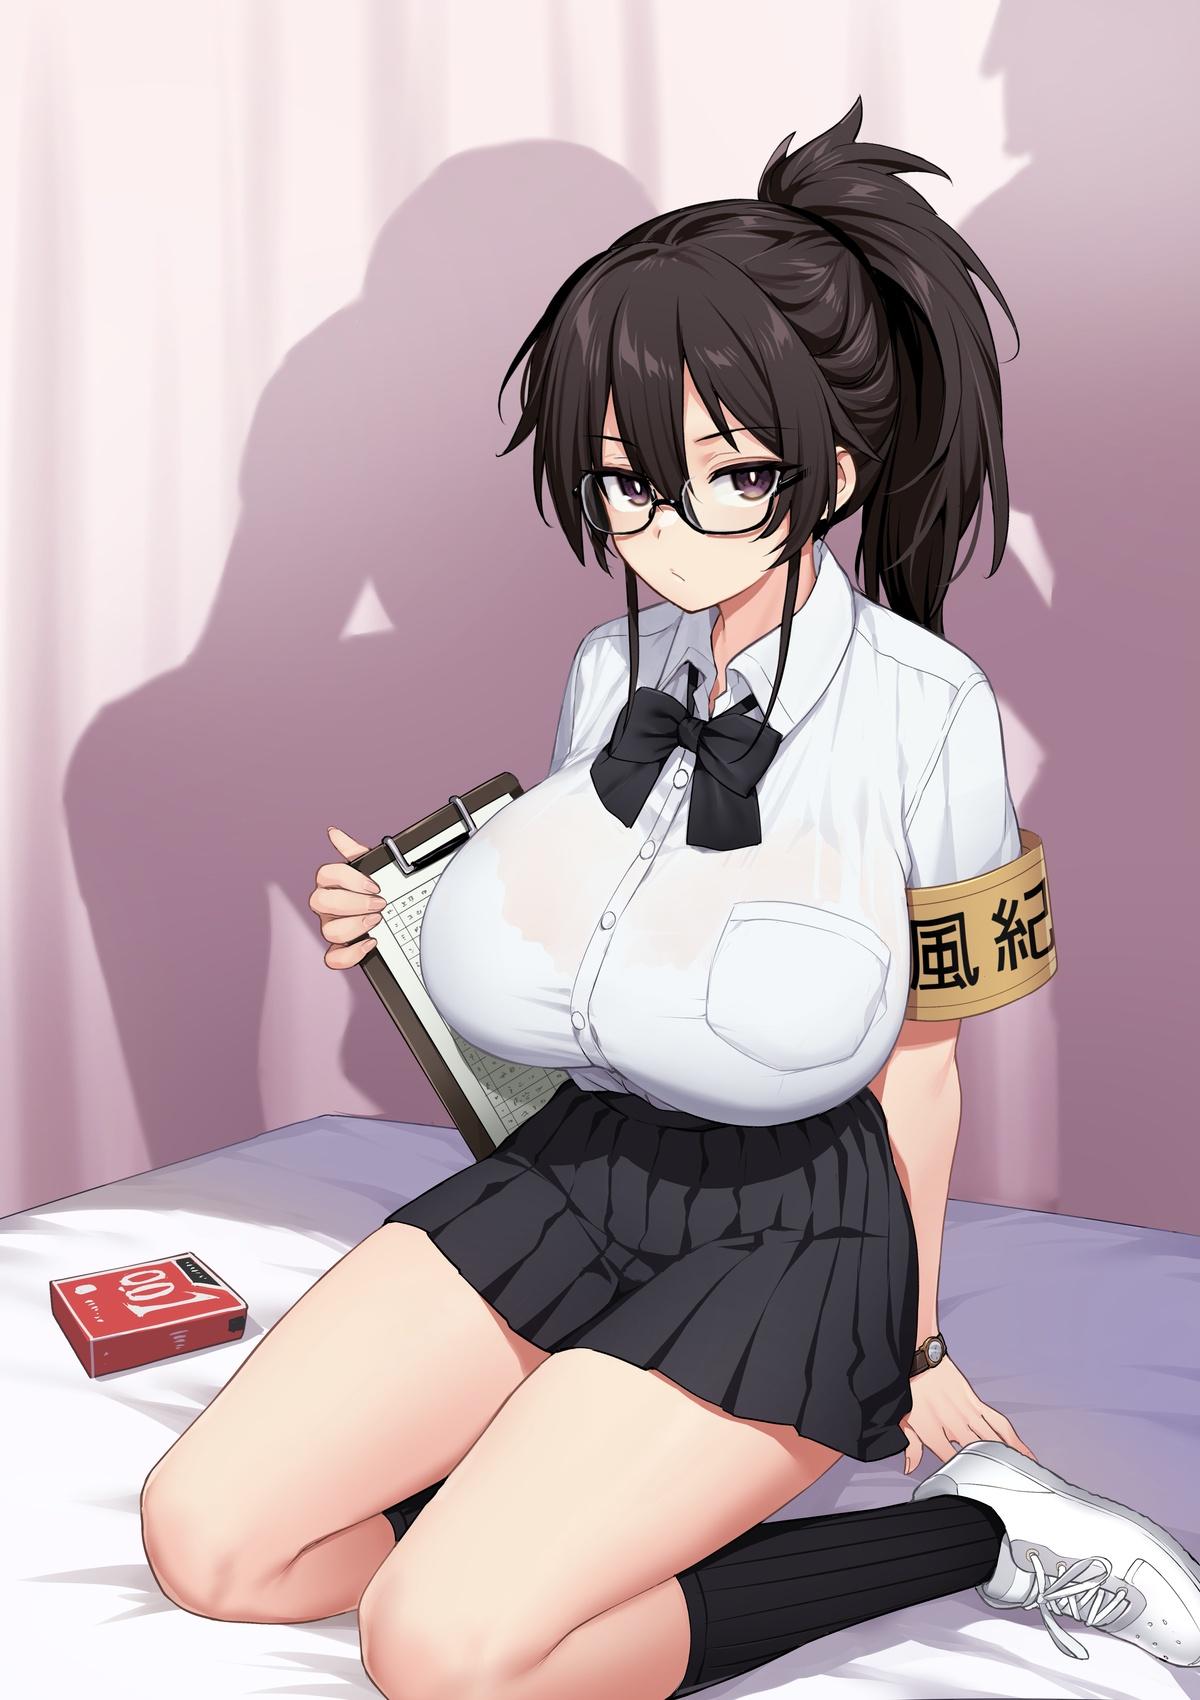 Cute Rumor Has It That The New Chairman of Disciplinary Committee Has Huge Breasts. Toy - Picture 2